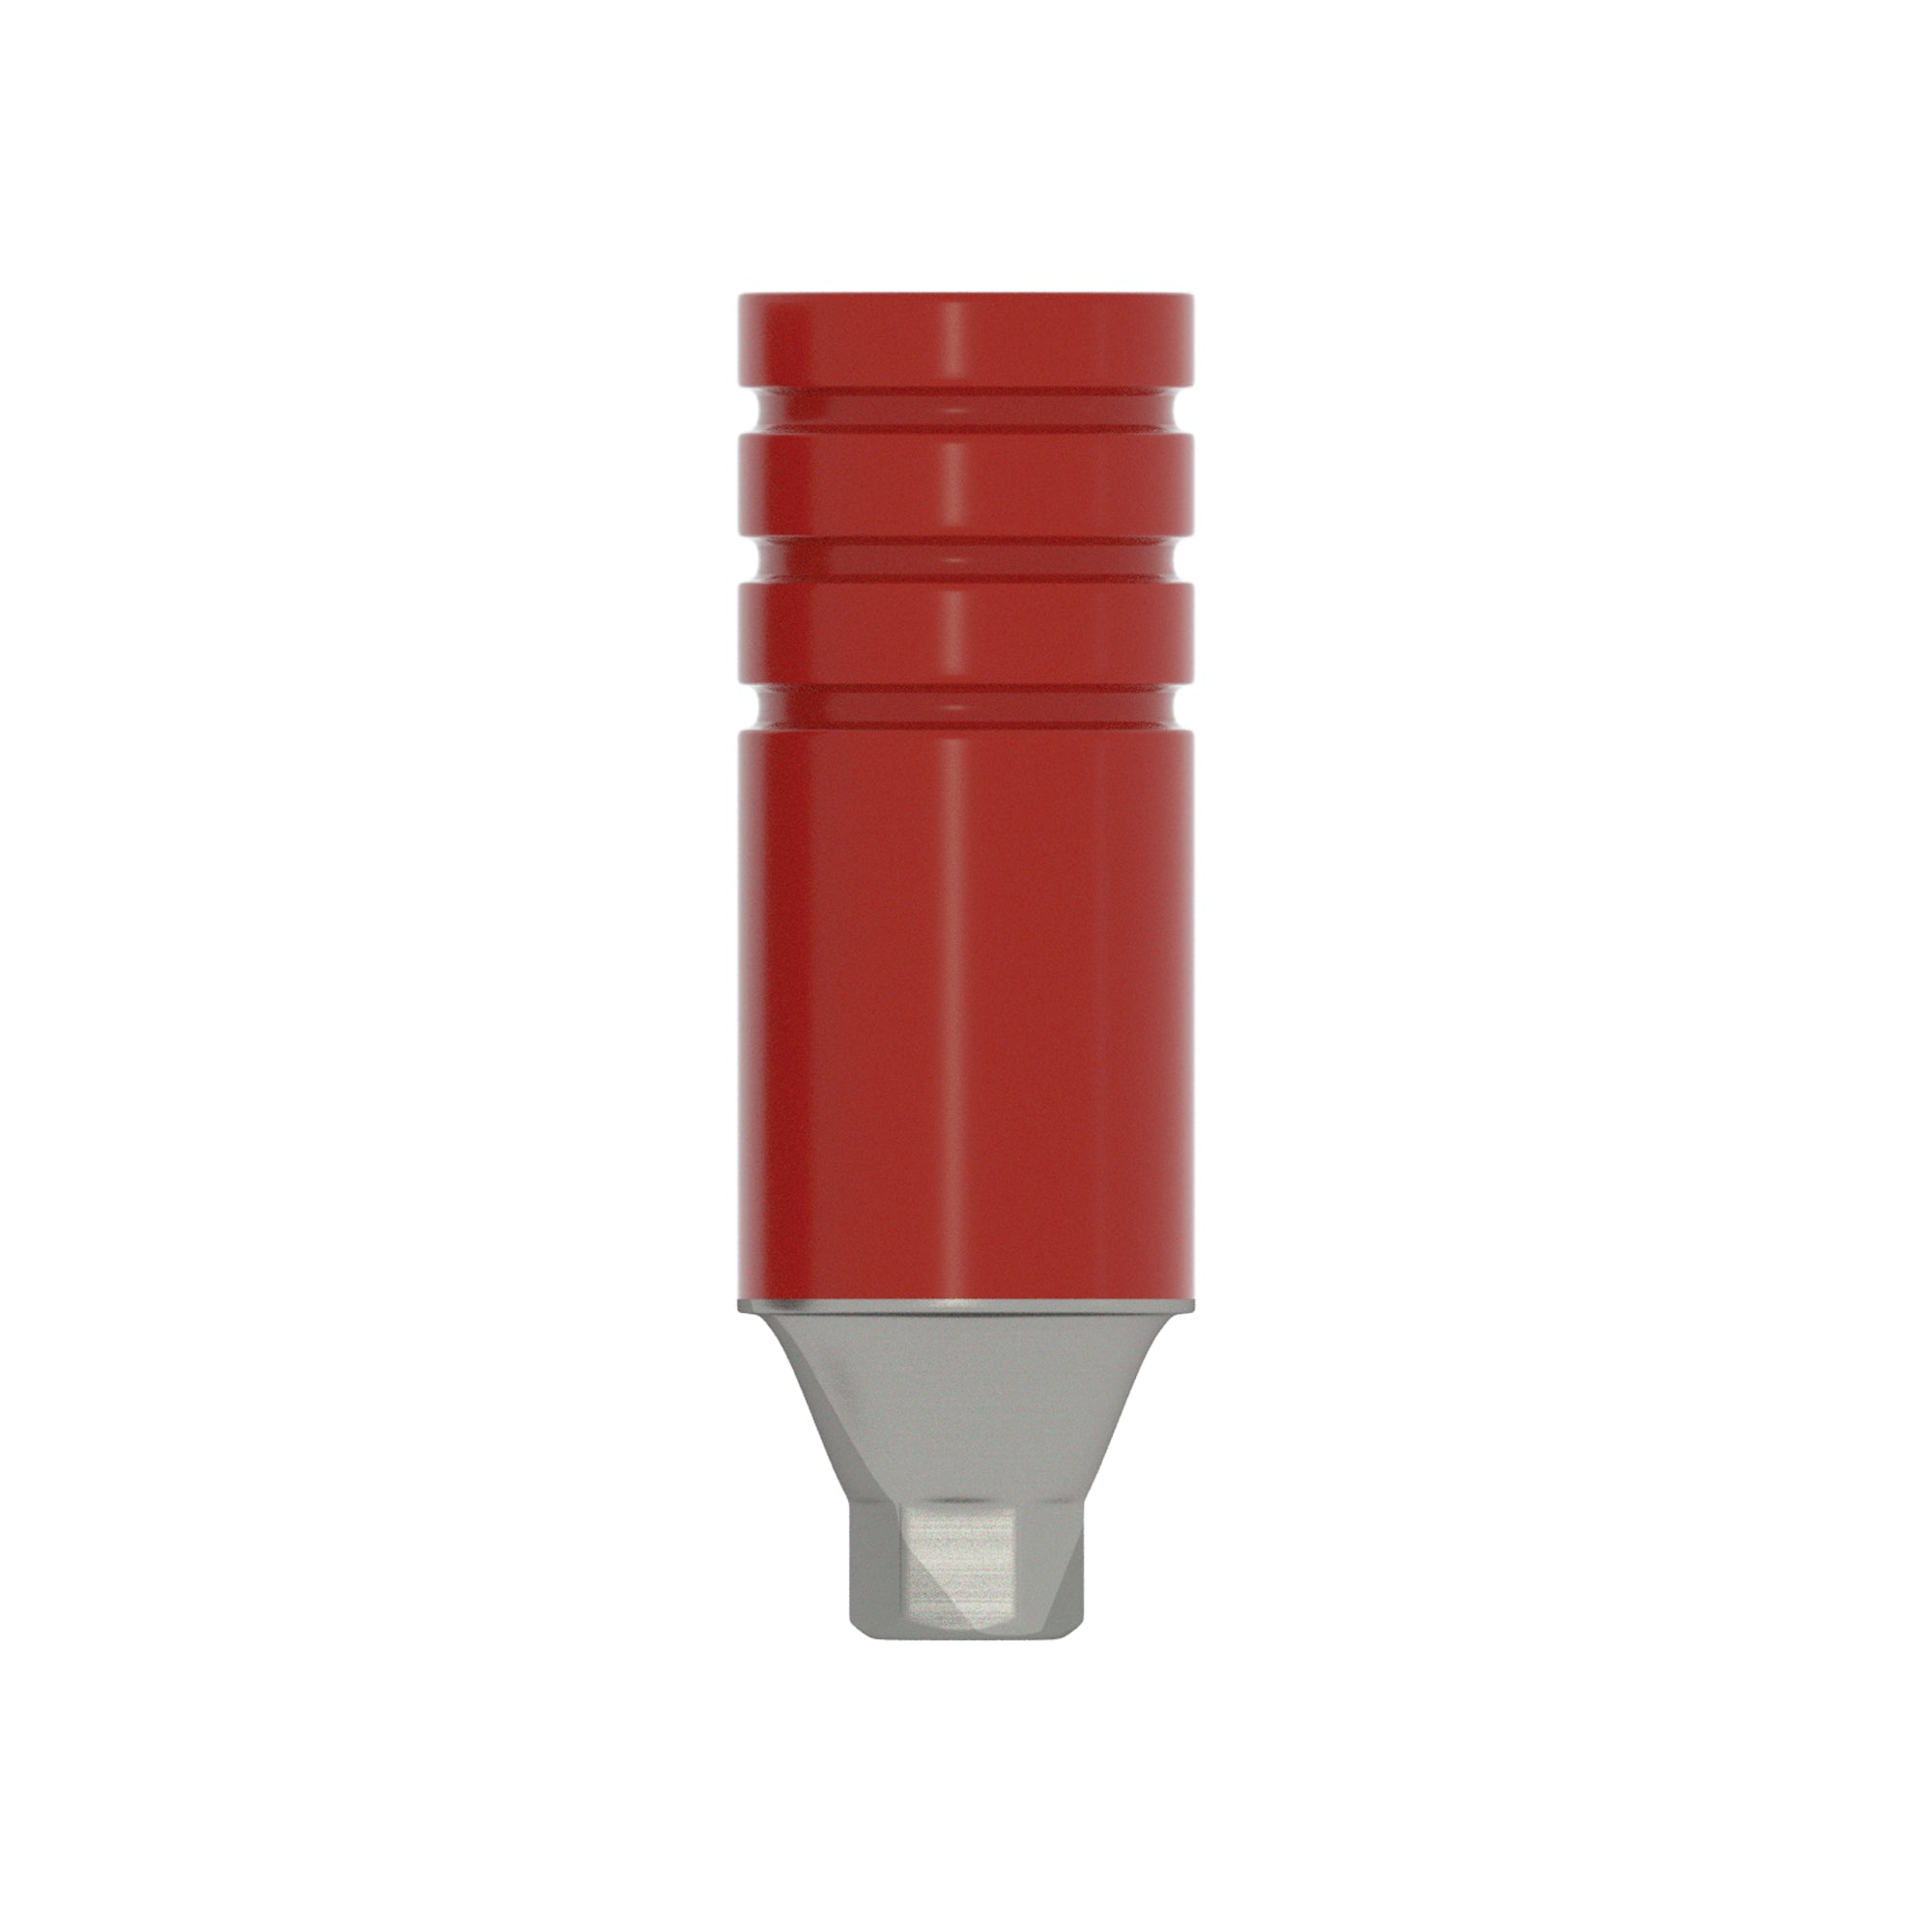 DSI Straight Castable CoCr Abutment (UCLA)  4.5mm -Conical Connection NP Ø3.5mm